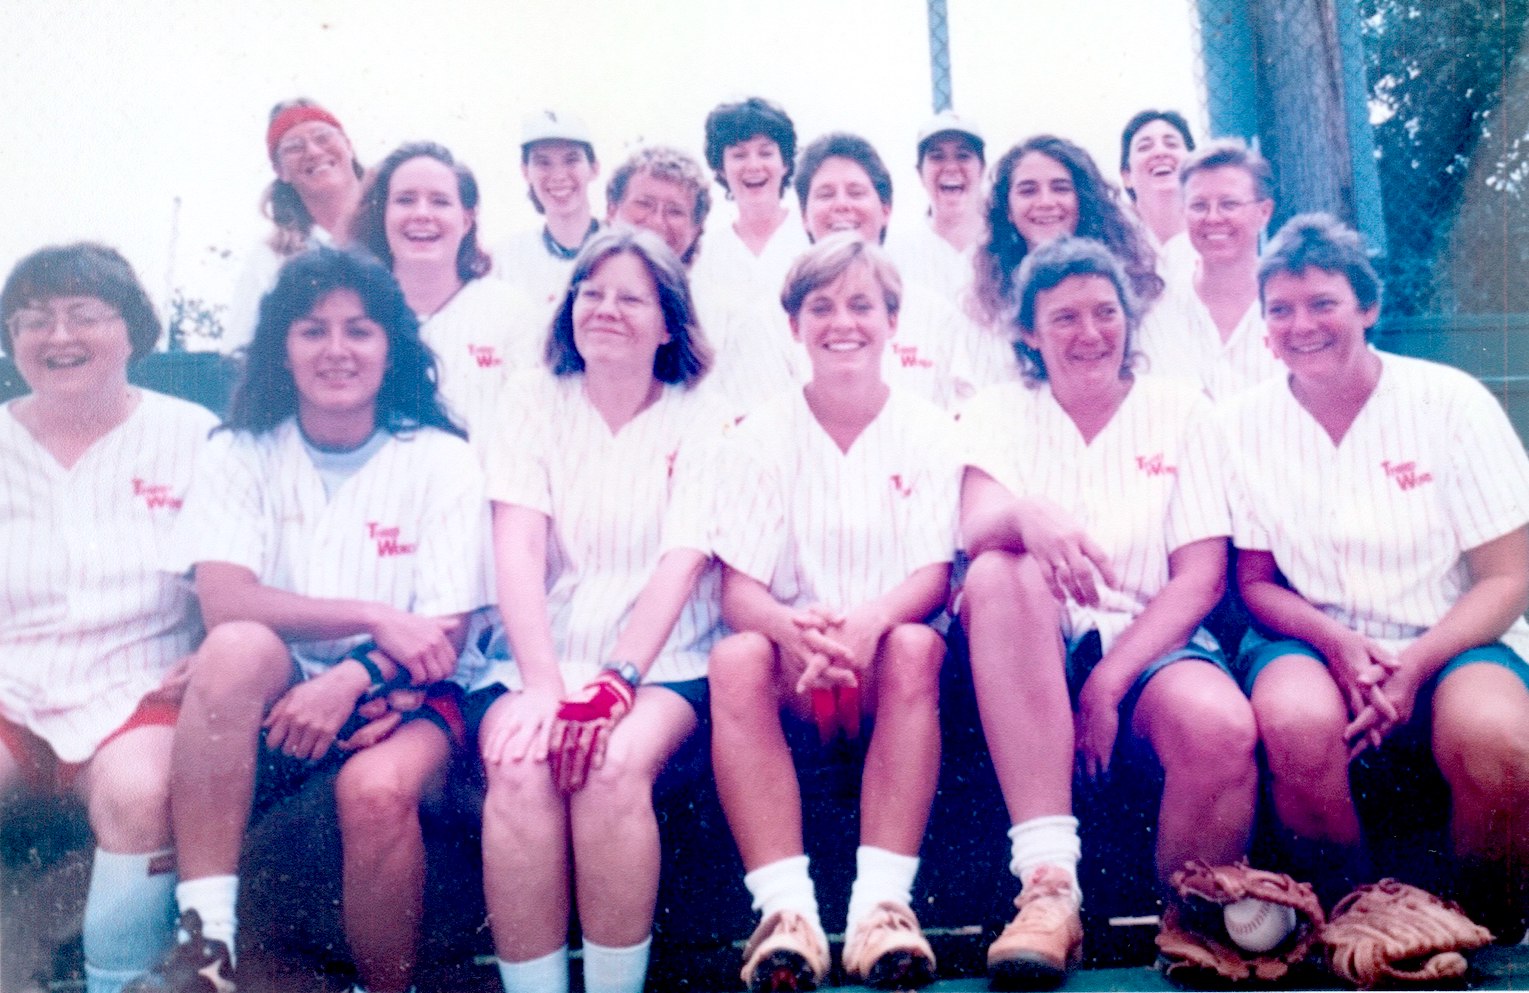 Kathie Hiers and the Third World Softball Team, circa 1994. Photo courtesy of Kathie Hiers.